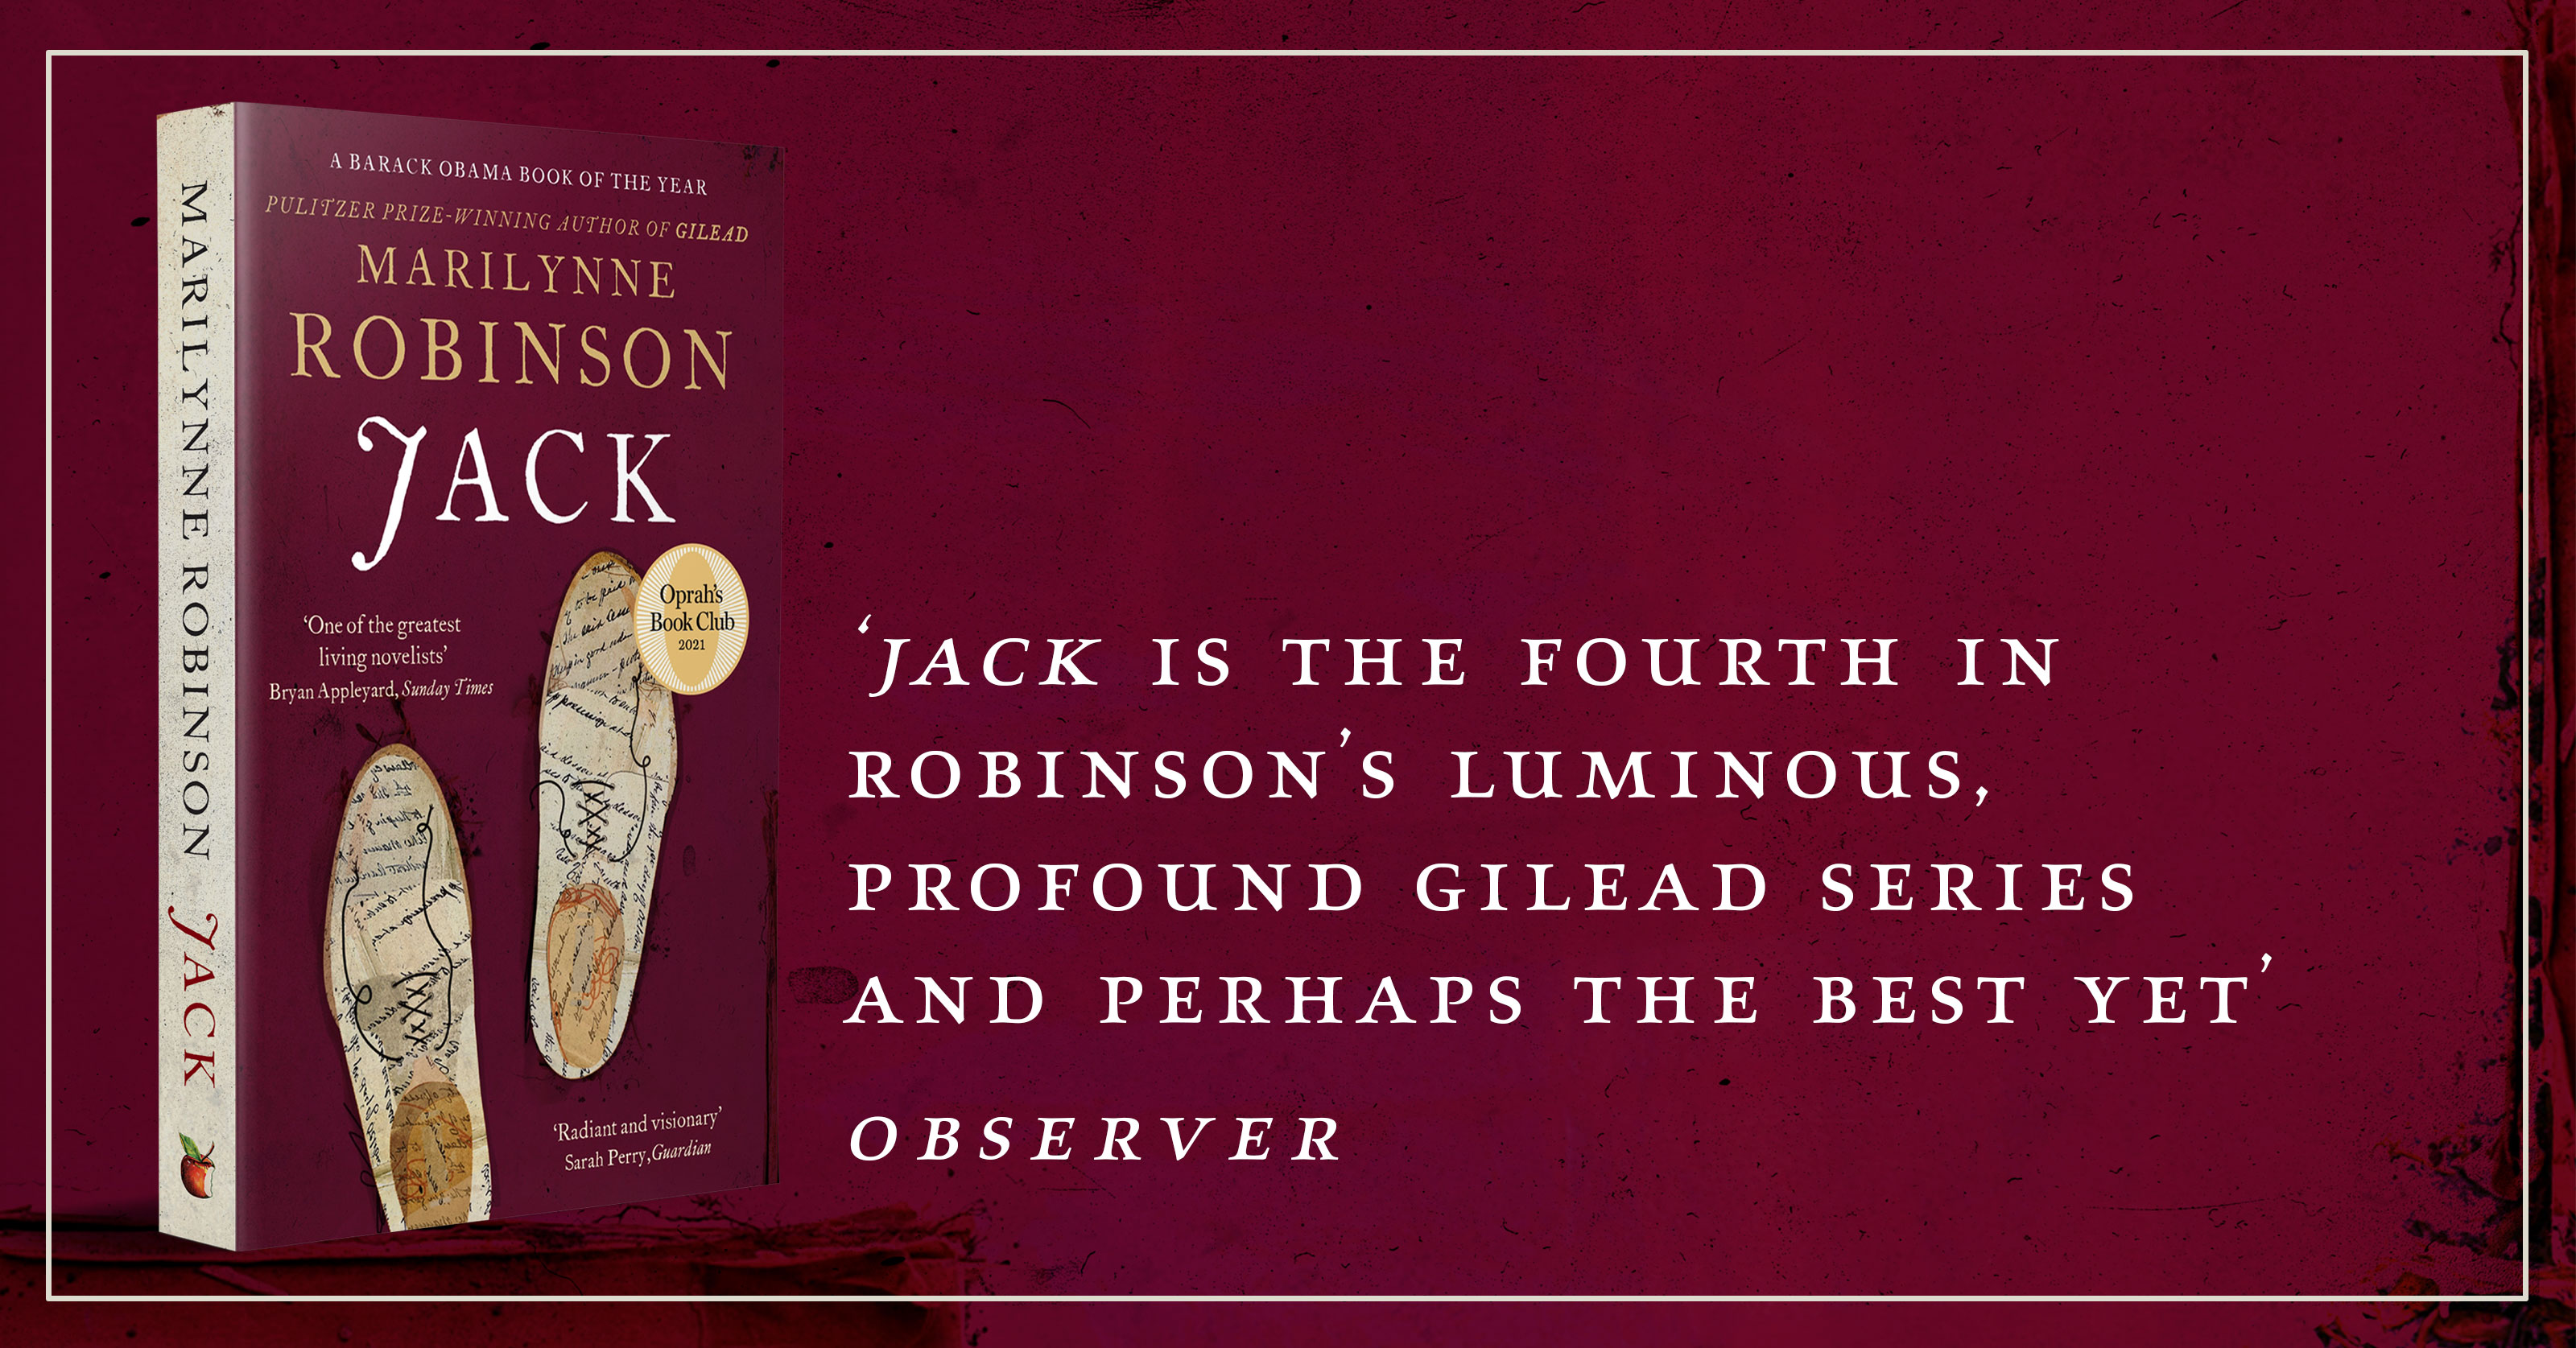 Jack Observer review quote